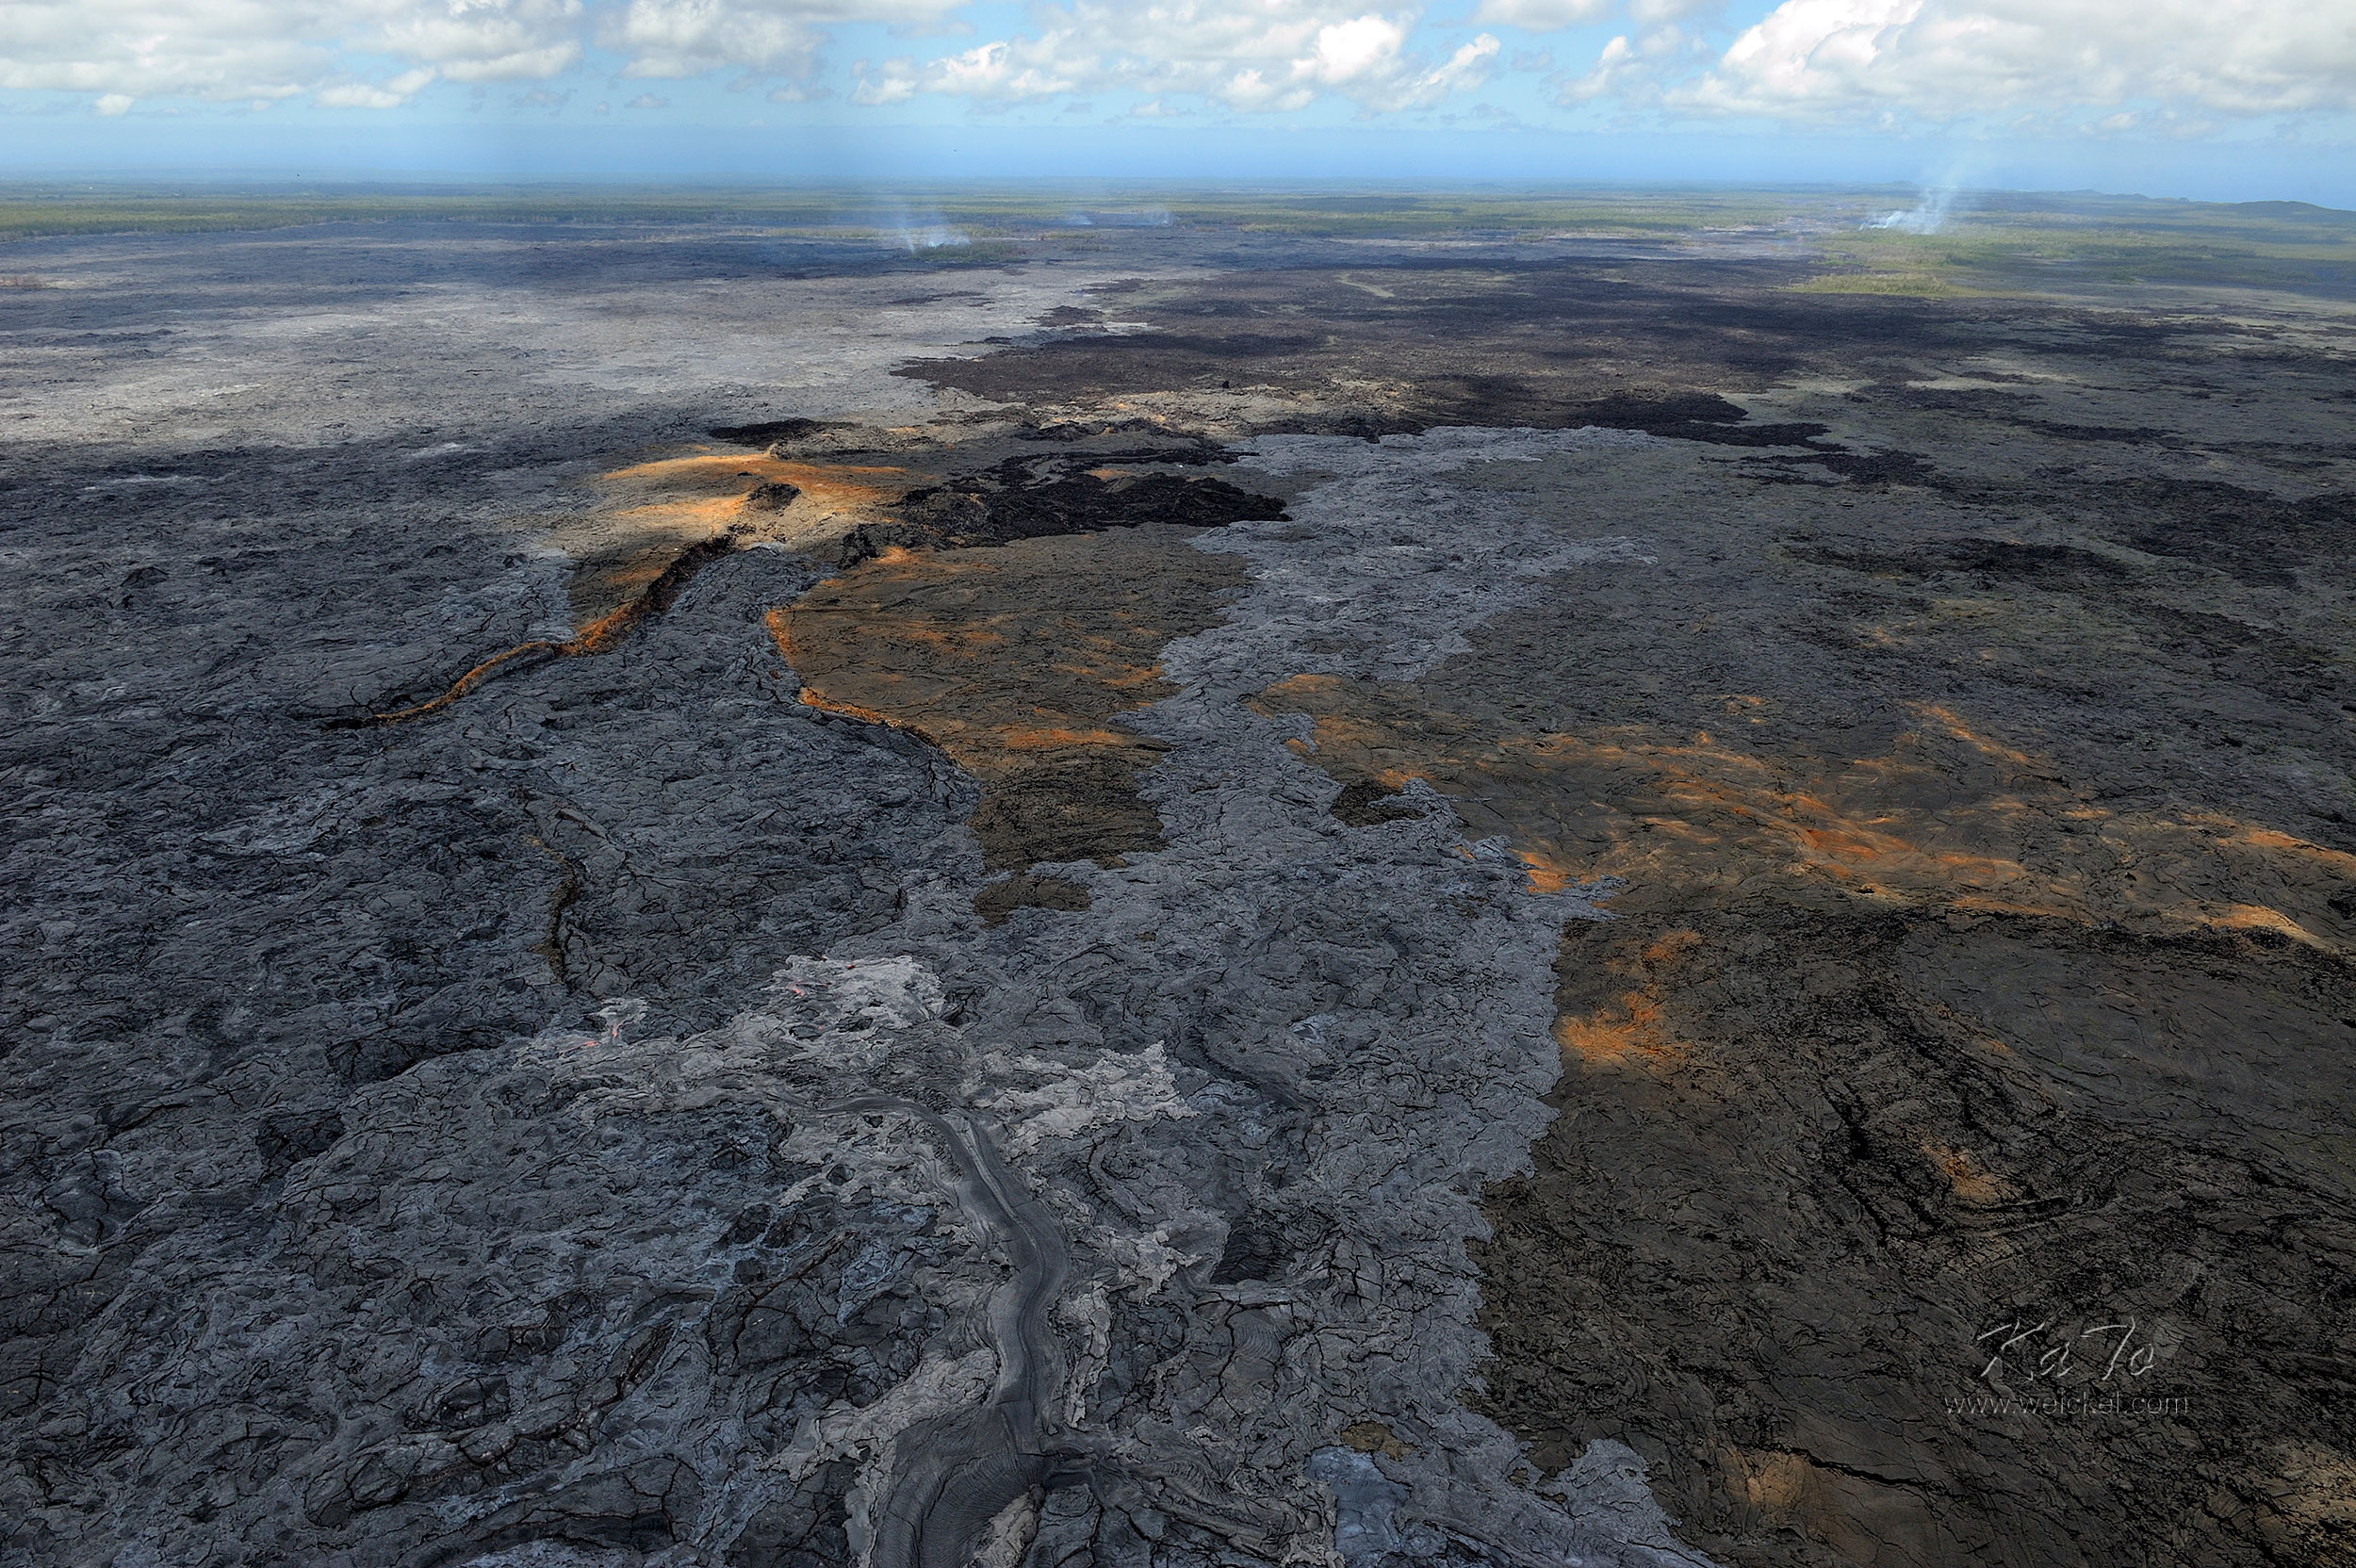 Flight with Paradise Helicopter - Volcanoes N.P.